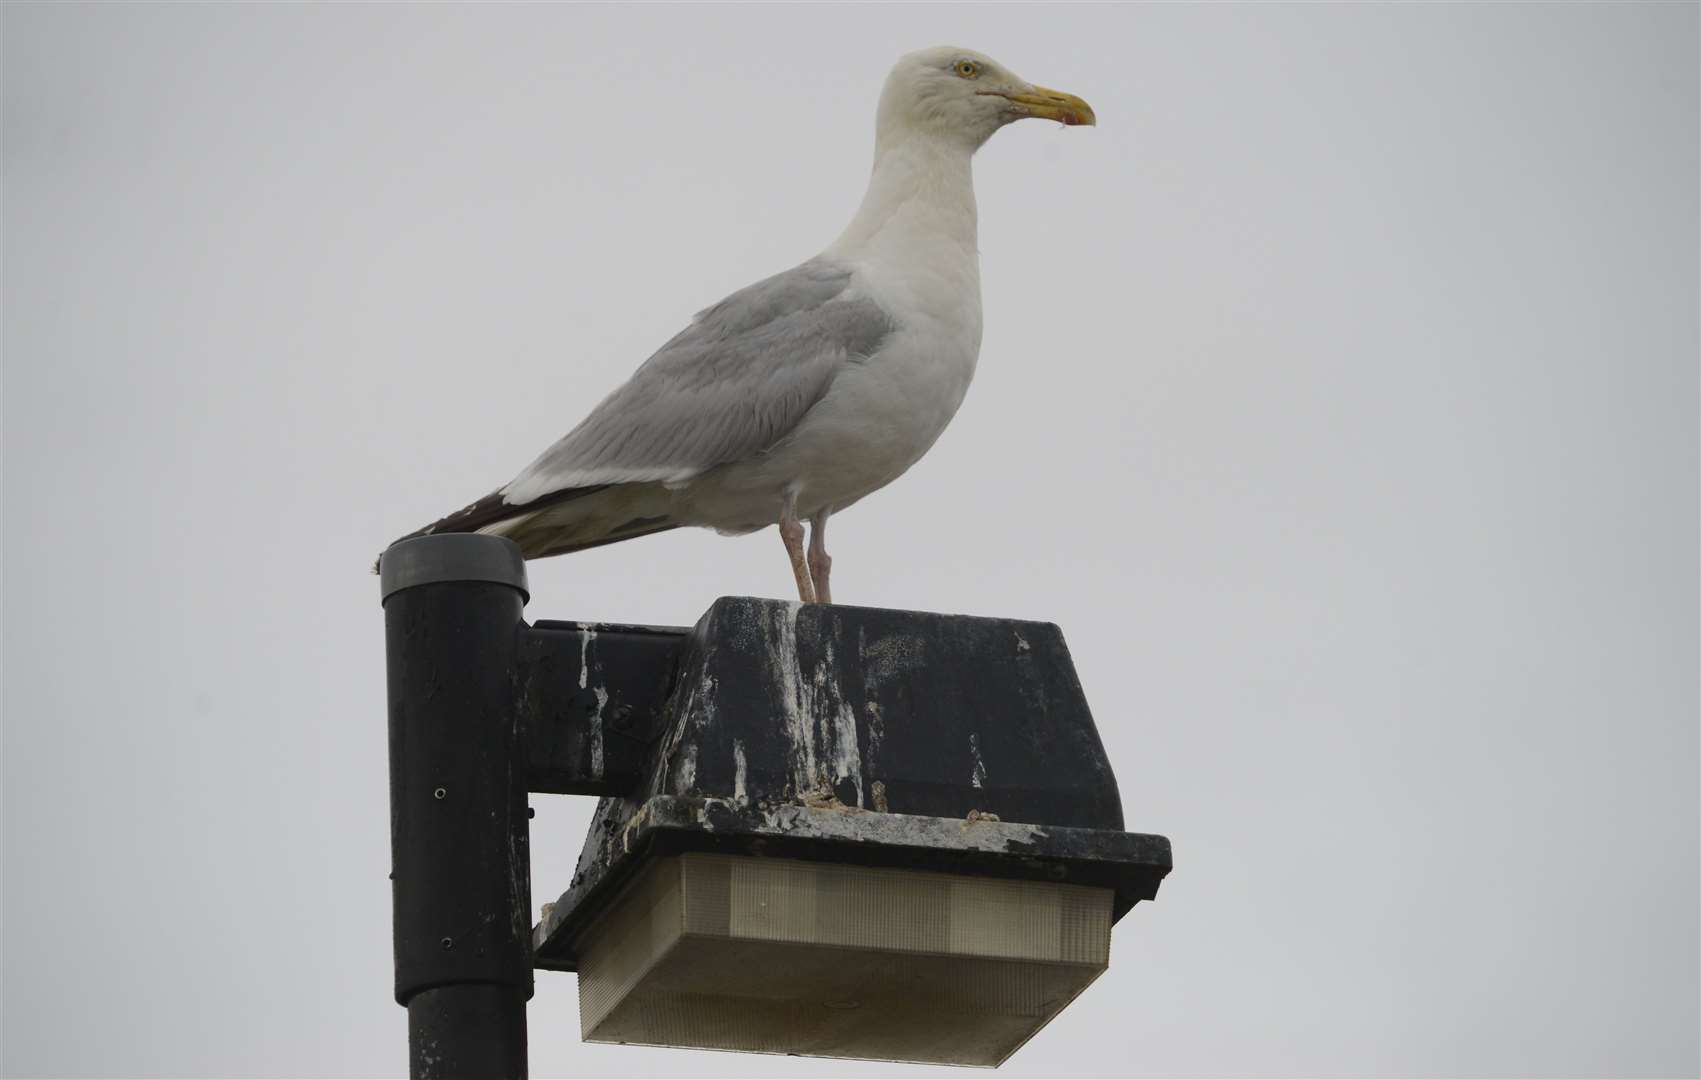 Natural England says gulls have become urban creatures